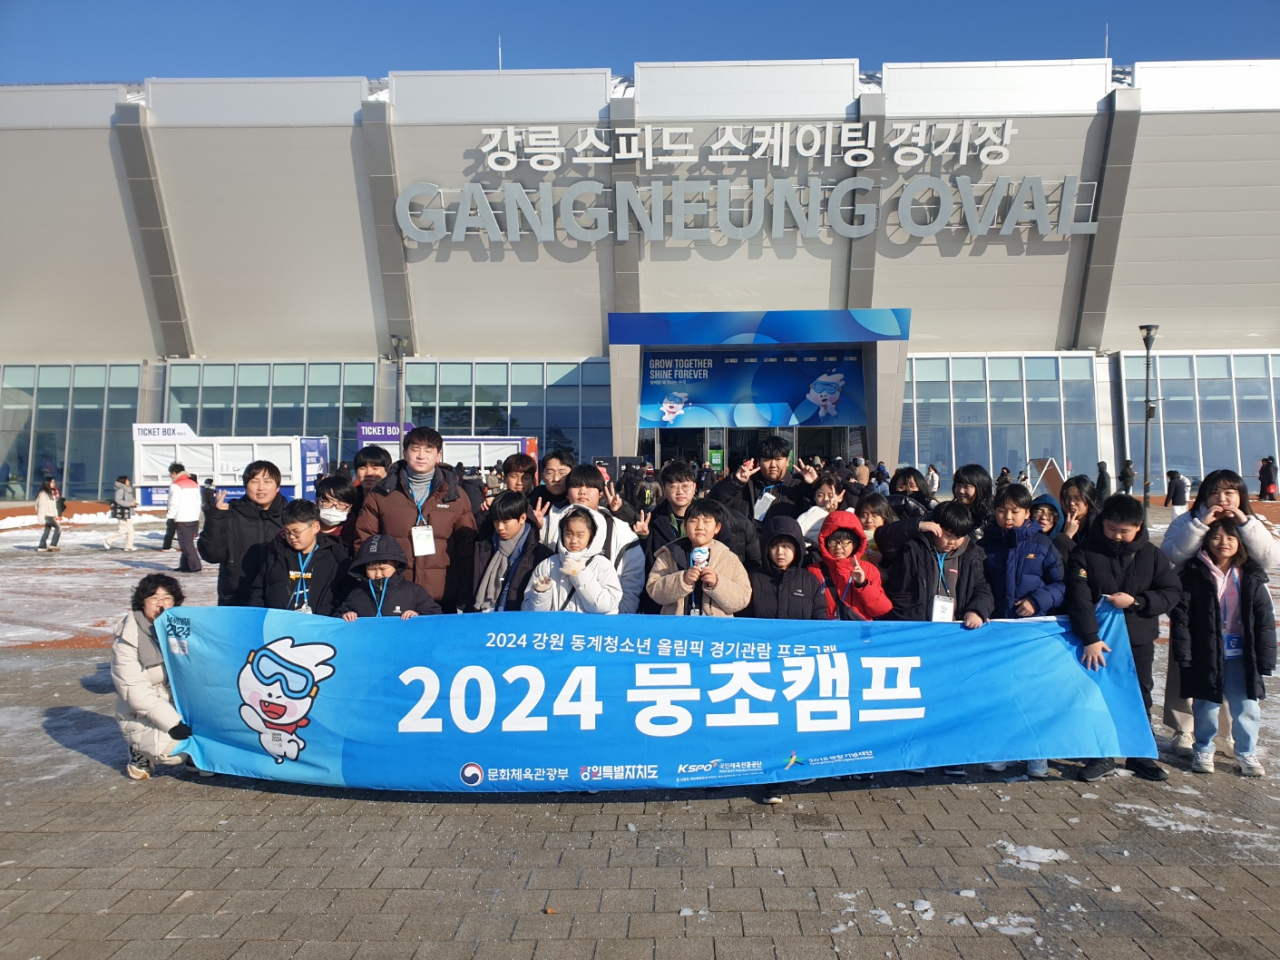 Participants of the PyeongChang 2018 Legacy Foundation’s programs pose for a photo at the Gangneung Oval in Gangwon Province. (PyeongChang 2018 Legacy Foundation)